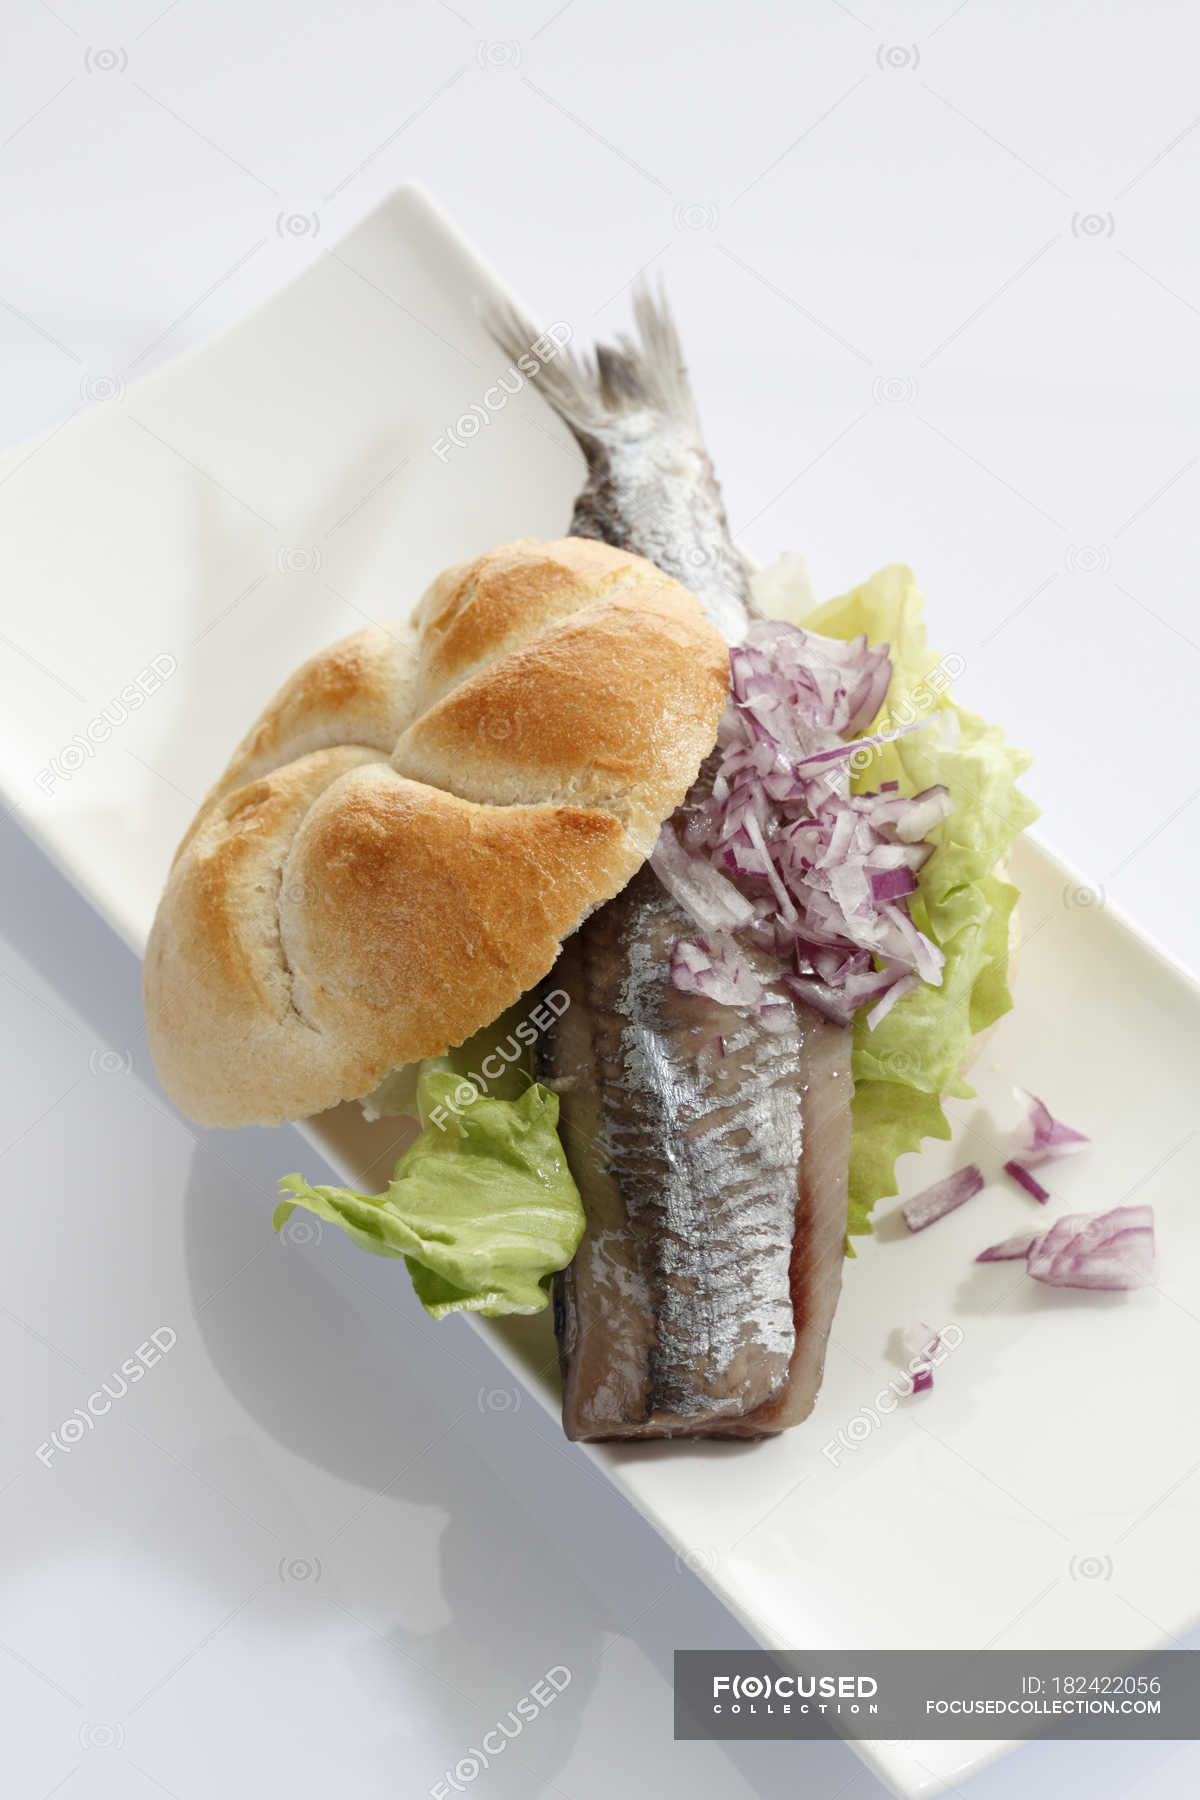 Sandwich stuffed with salted herring — meal, appetizing - Stock Photo ...